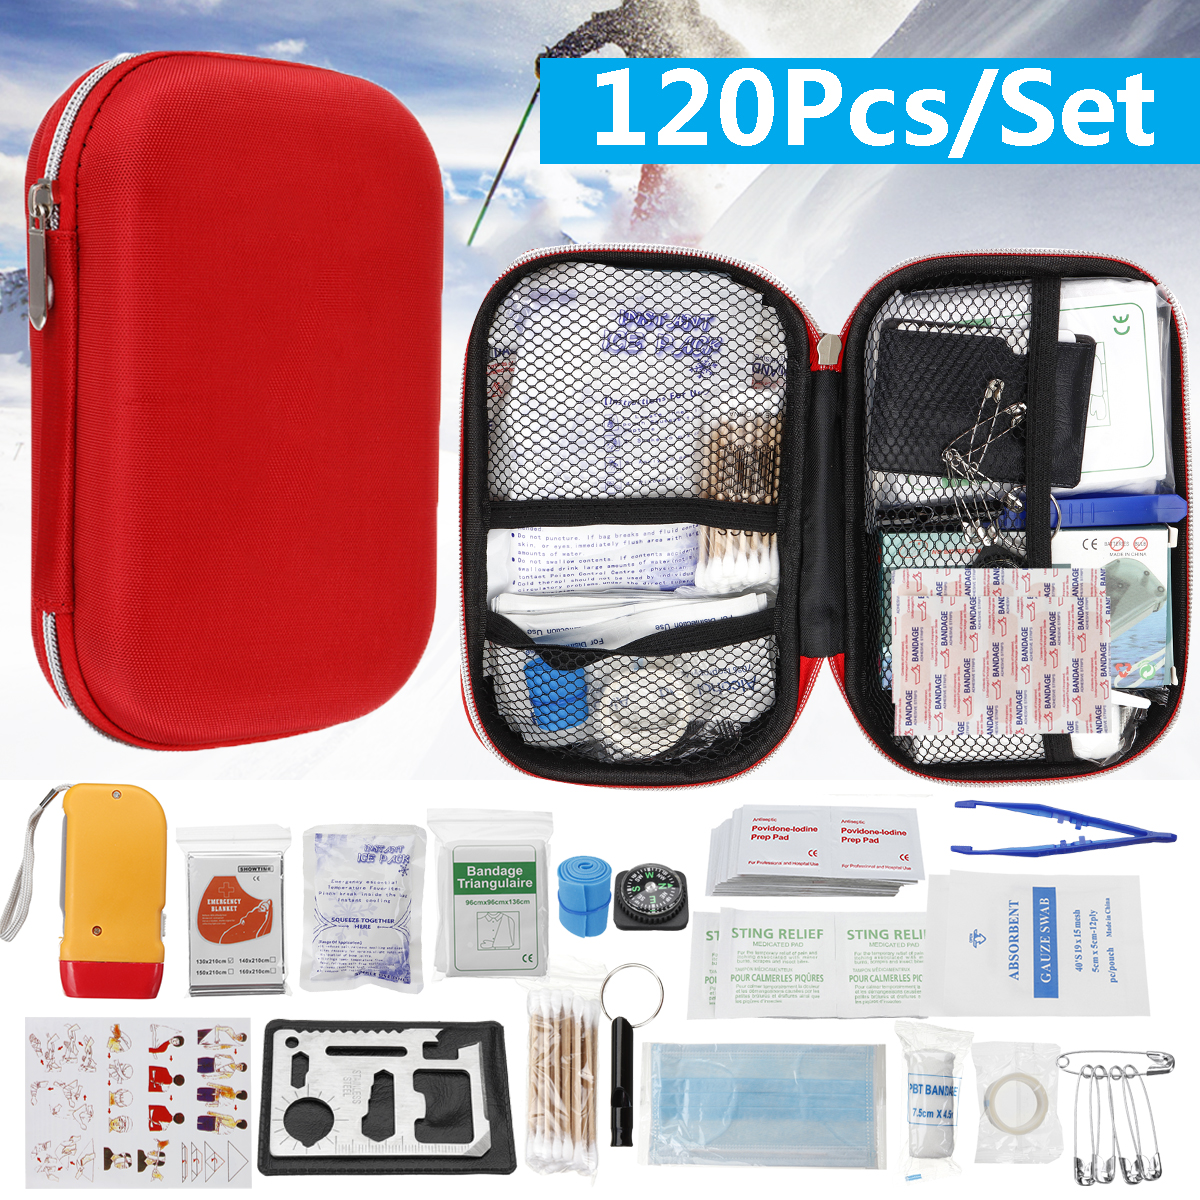 Upgraded-Outdoor-Emergency-Survival-First-Aid-Kit-Gear-for-Home-Office-Car-Boat-Camping-Hiking-Trave-1415500-1